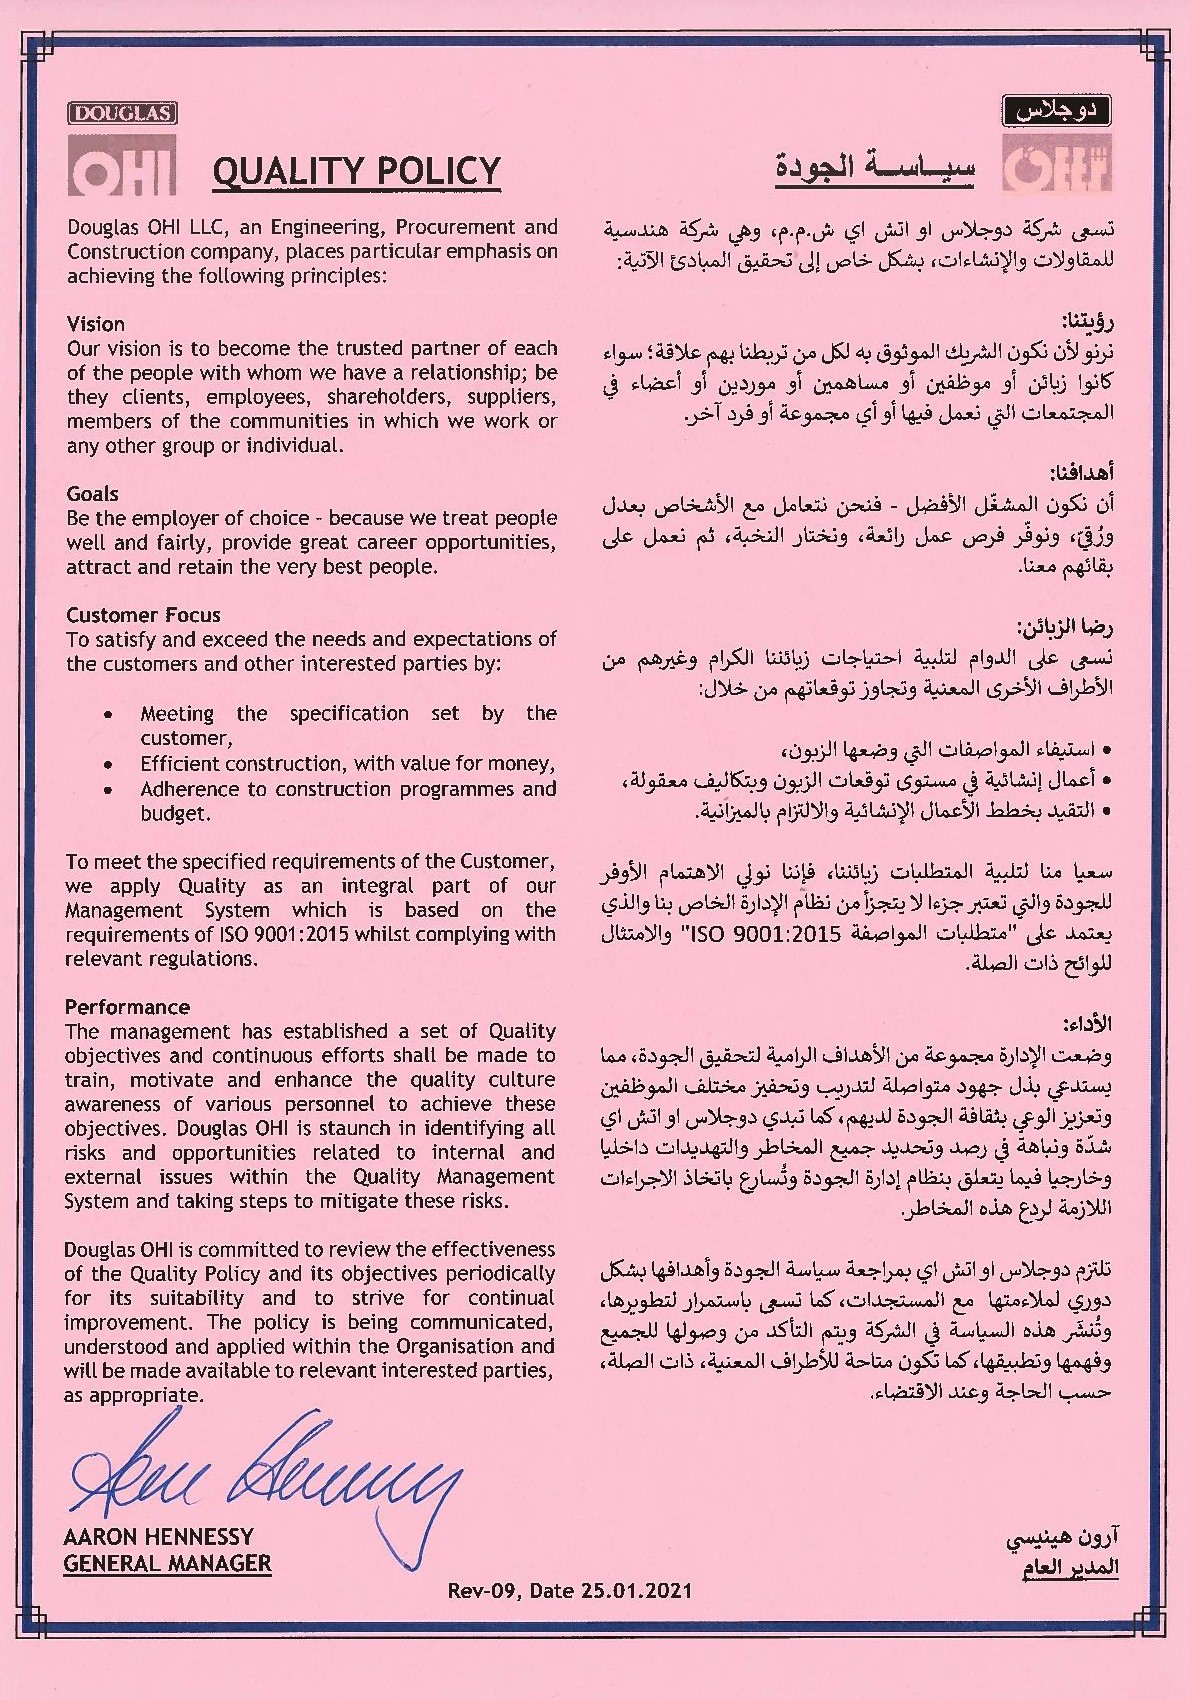 Quality Policy – English and Arabic Rev-09 dated 25.01.2021